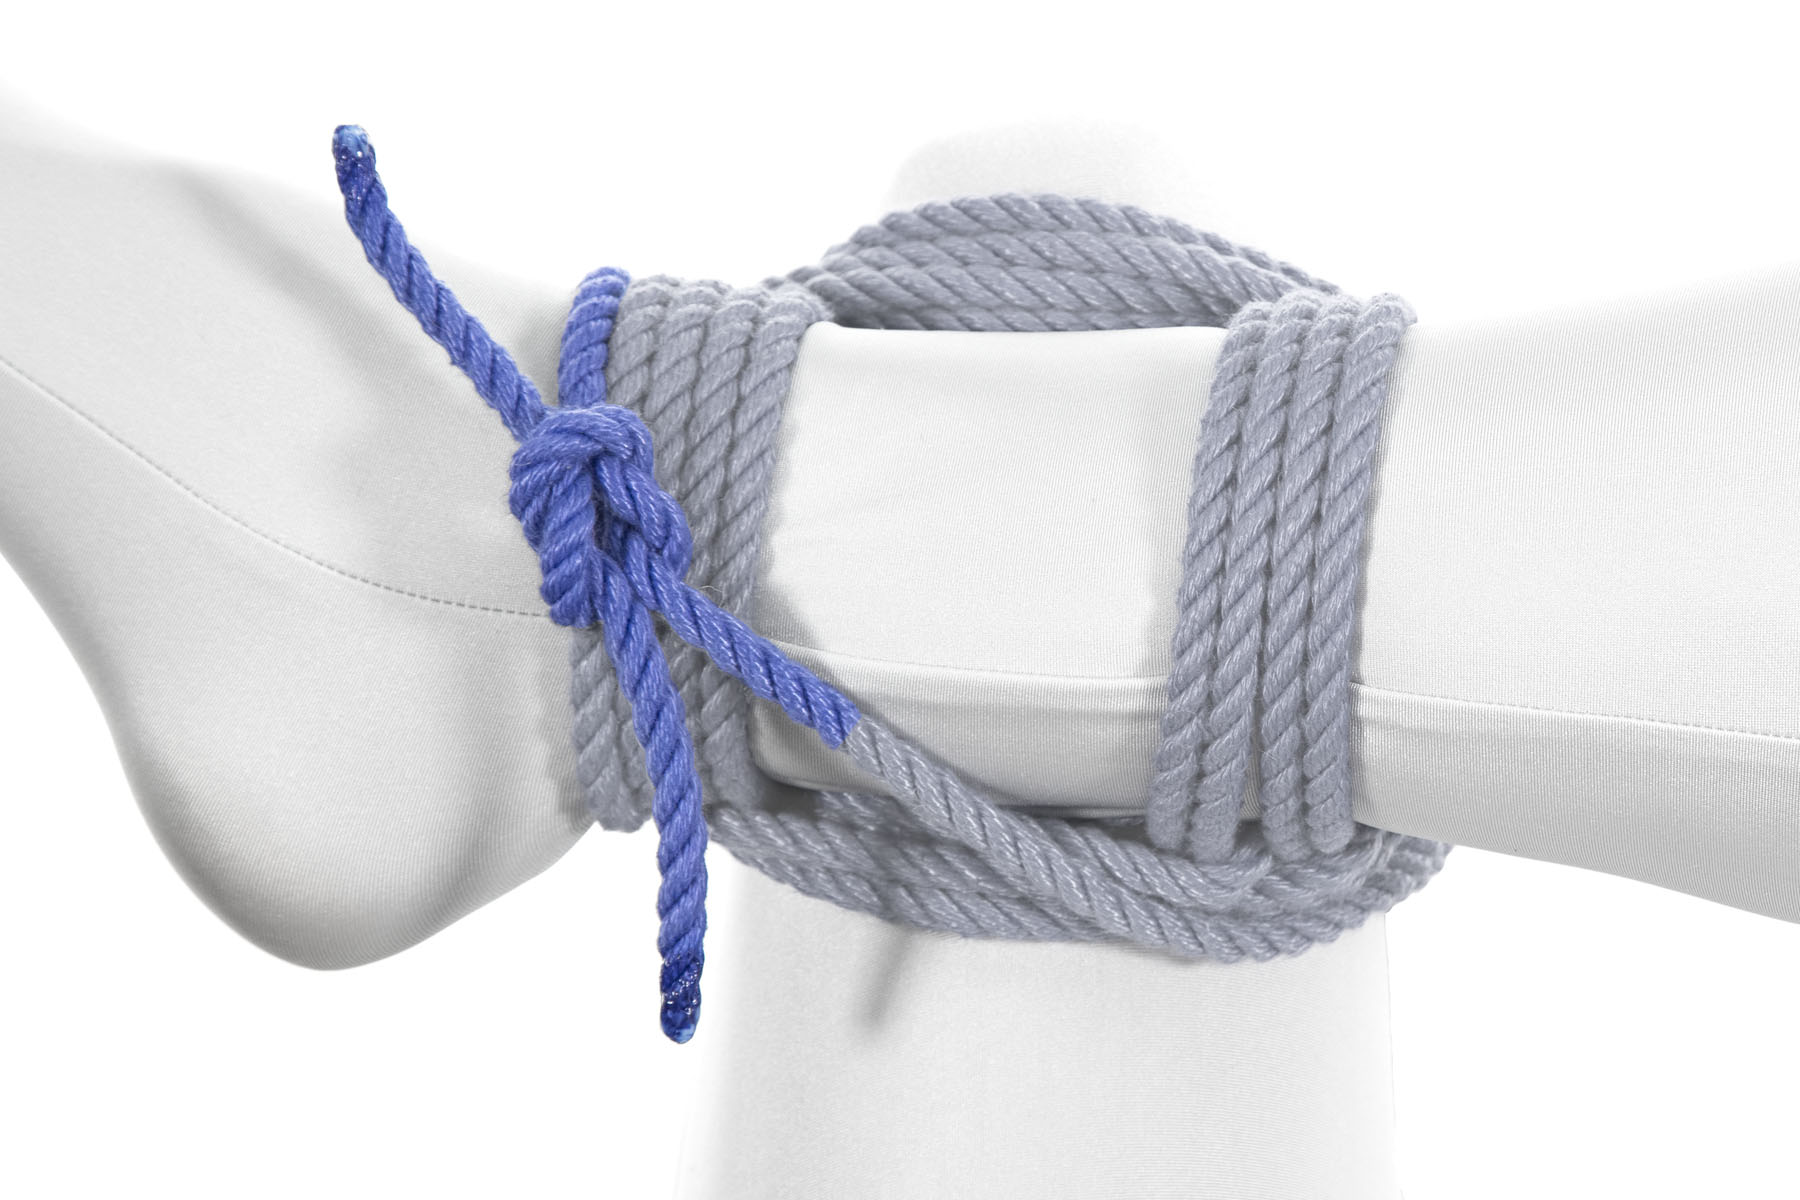 The two ends have been tied together with a square knot that lies on top of the ankle.